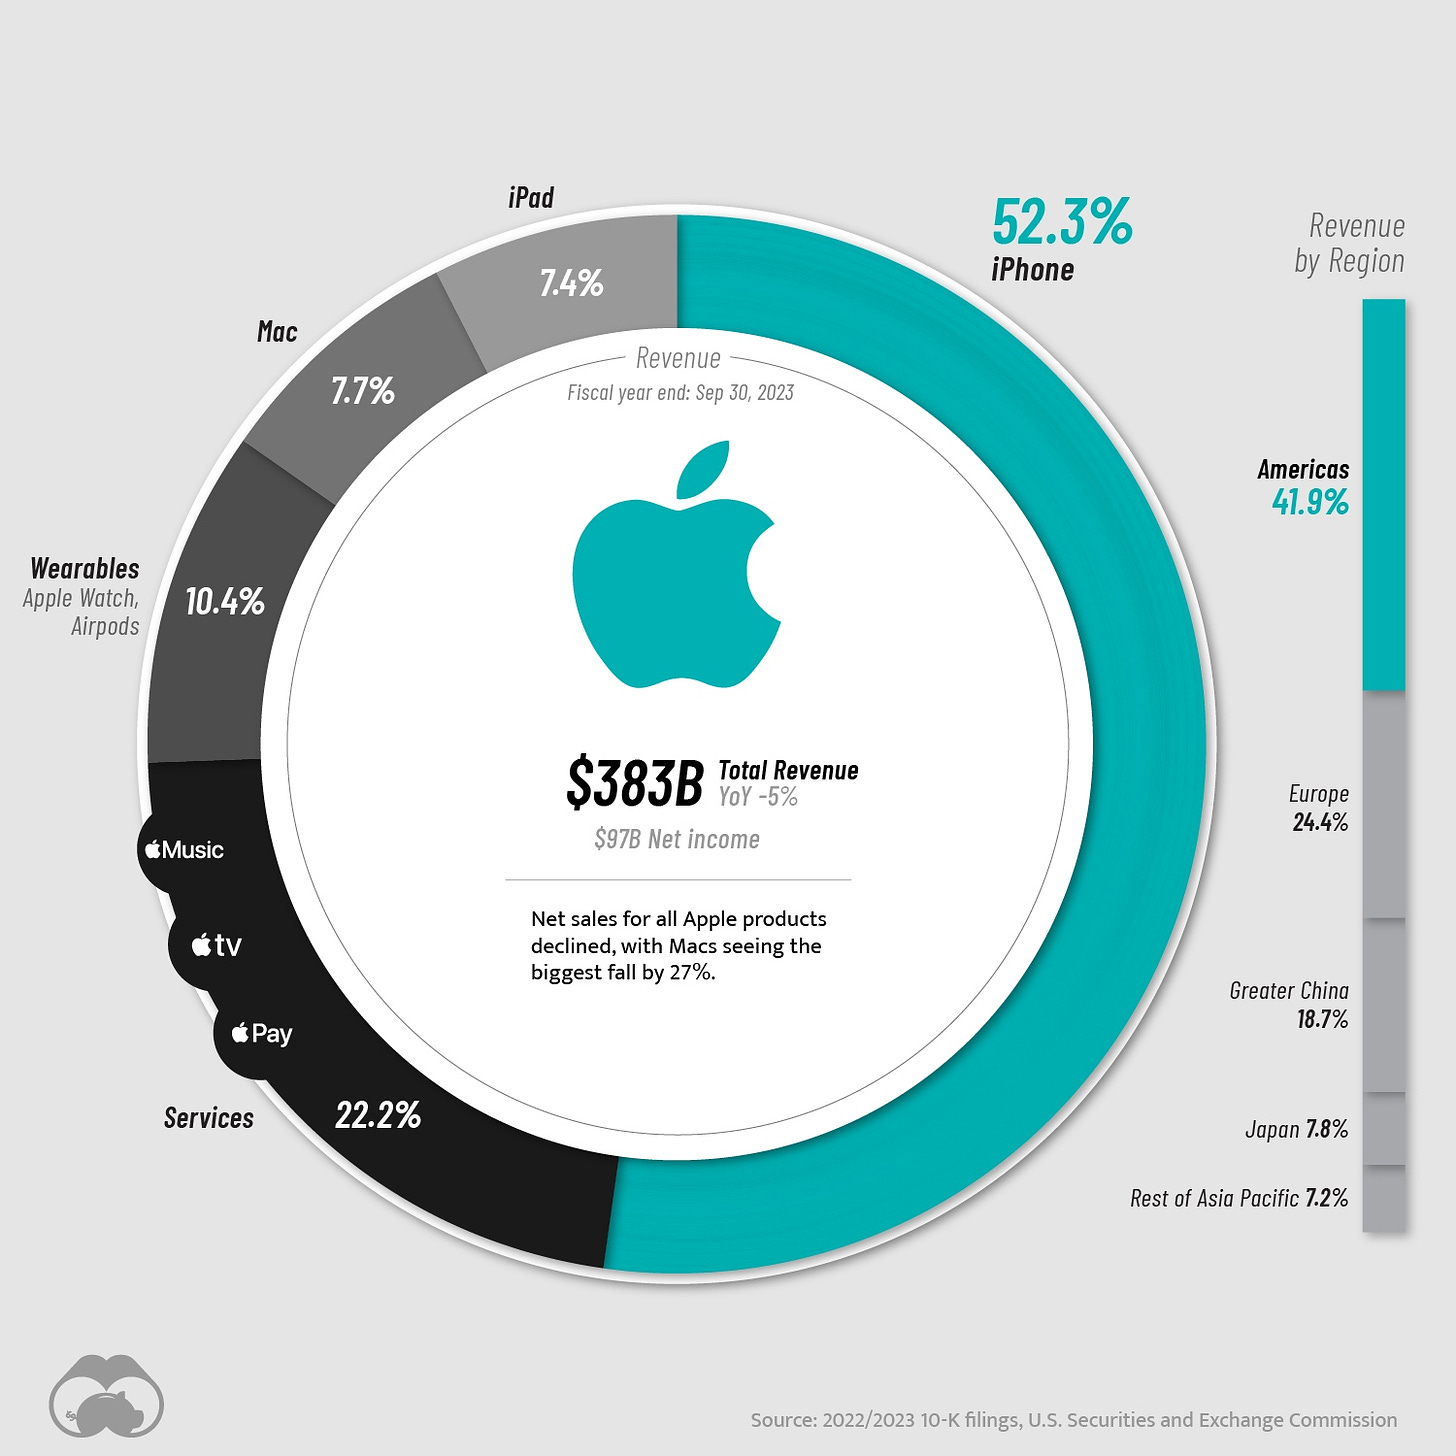 May be a graphic of text that says 'iPad Mac 7.4% 7.7% 52.3% iPhone Revenue :Sep30 2023 Revenue by Region Wearables Apple Watch, Airpods 10.4% Americas 41.9% ¿Music $383B Total Revenue $97B ecome útv Net sales foral Apple products declined, ined, Macs seeing the biggesfa by27% Europe 24.4% Pay Services 22.2% Greater China 18.7% Japan .8% Rest Asia Pacific .2% 2022/2023 10-K filings, U.S. Securities Û and Exchange Commission'